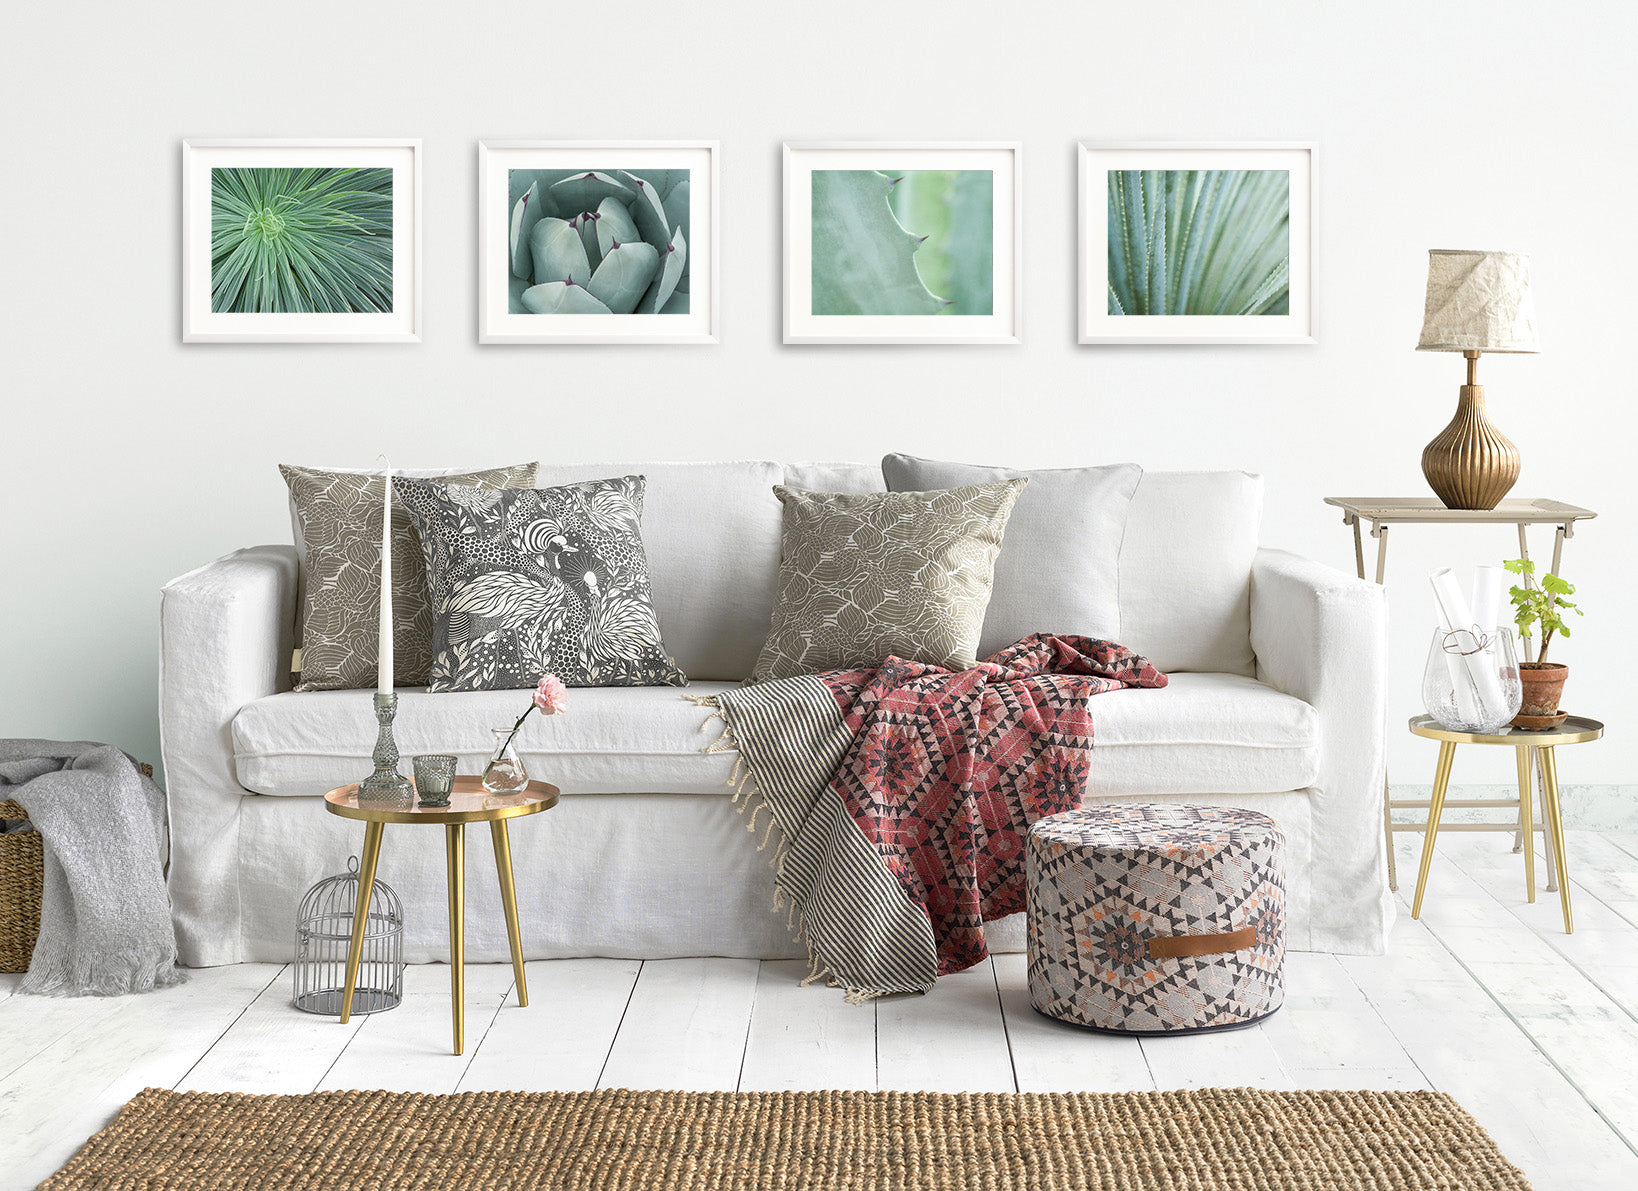 Picture of botanical framed prints on a wall behind a sofa